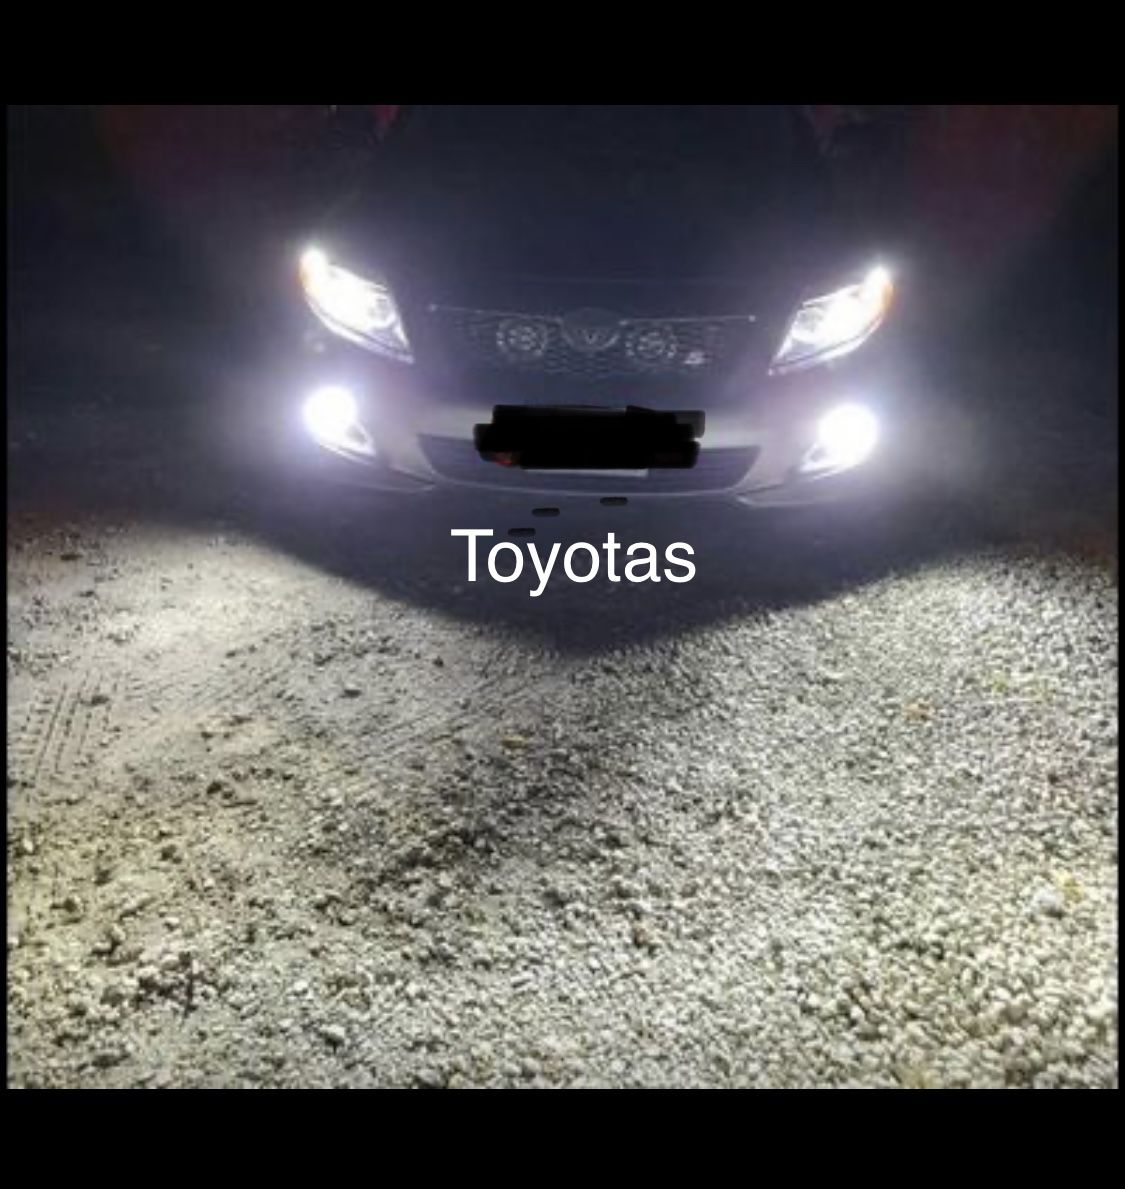  Led Bright Bulb Upgrades Any Vehicle With Warranty 6000k Bright White 8000k 3k TOYOTA 9003 H4 Luces 